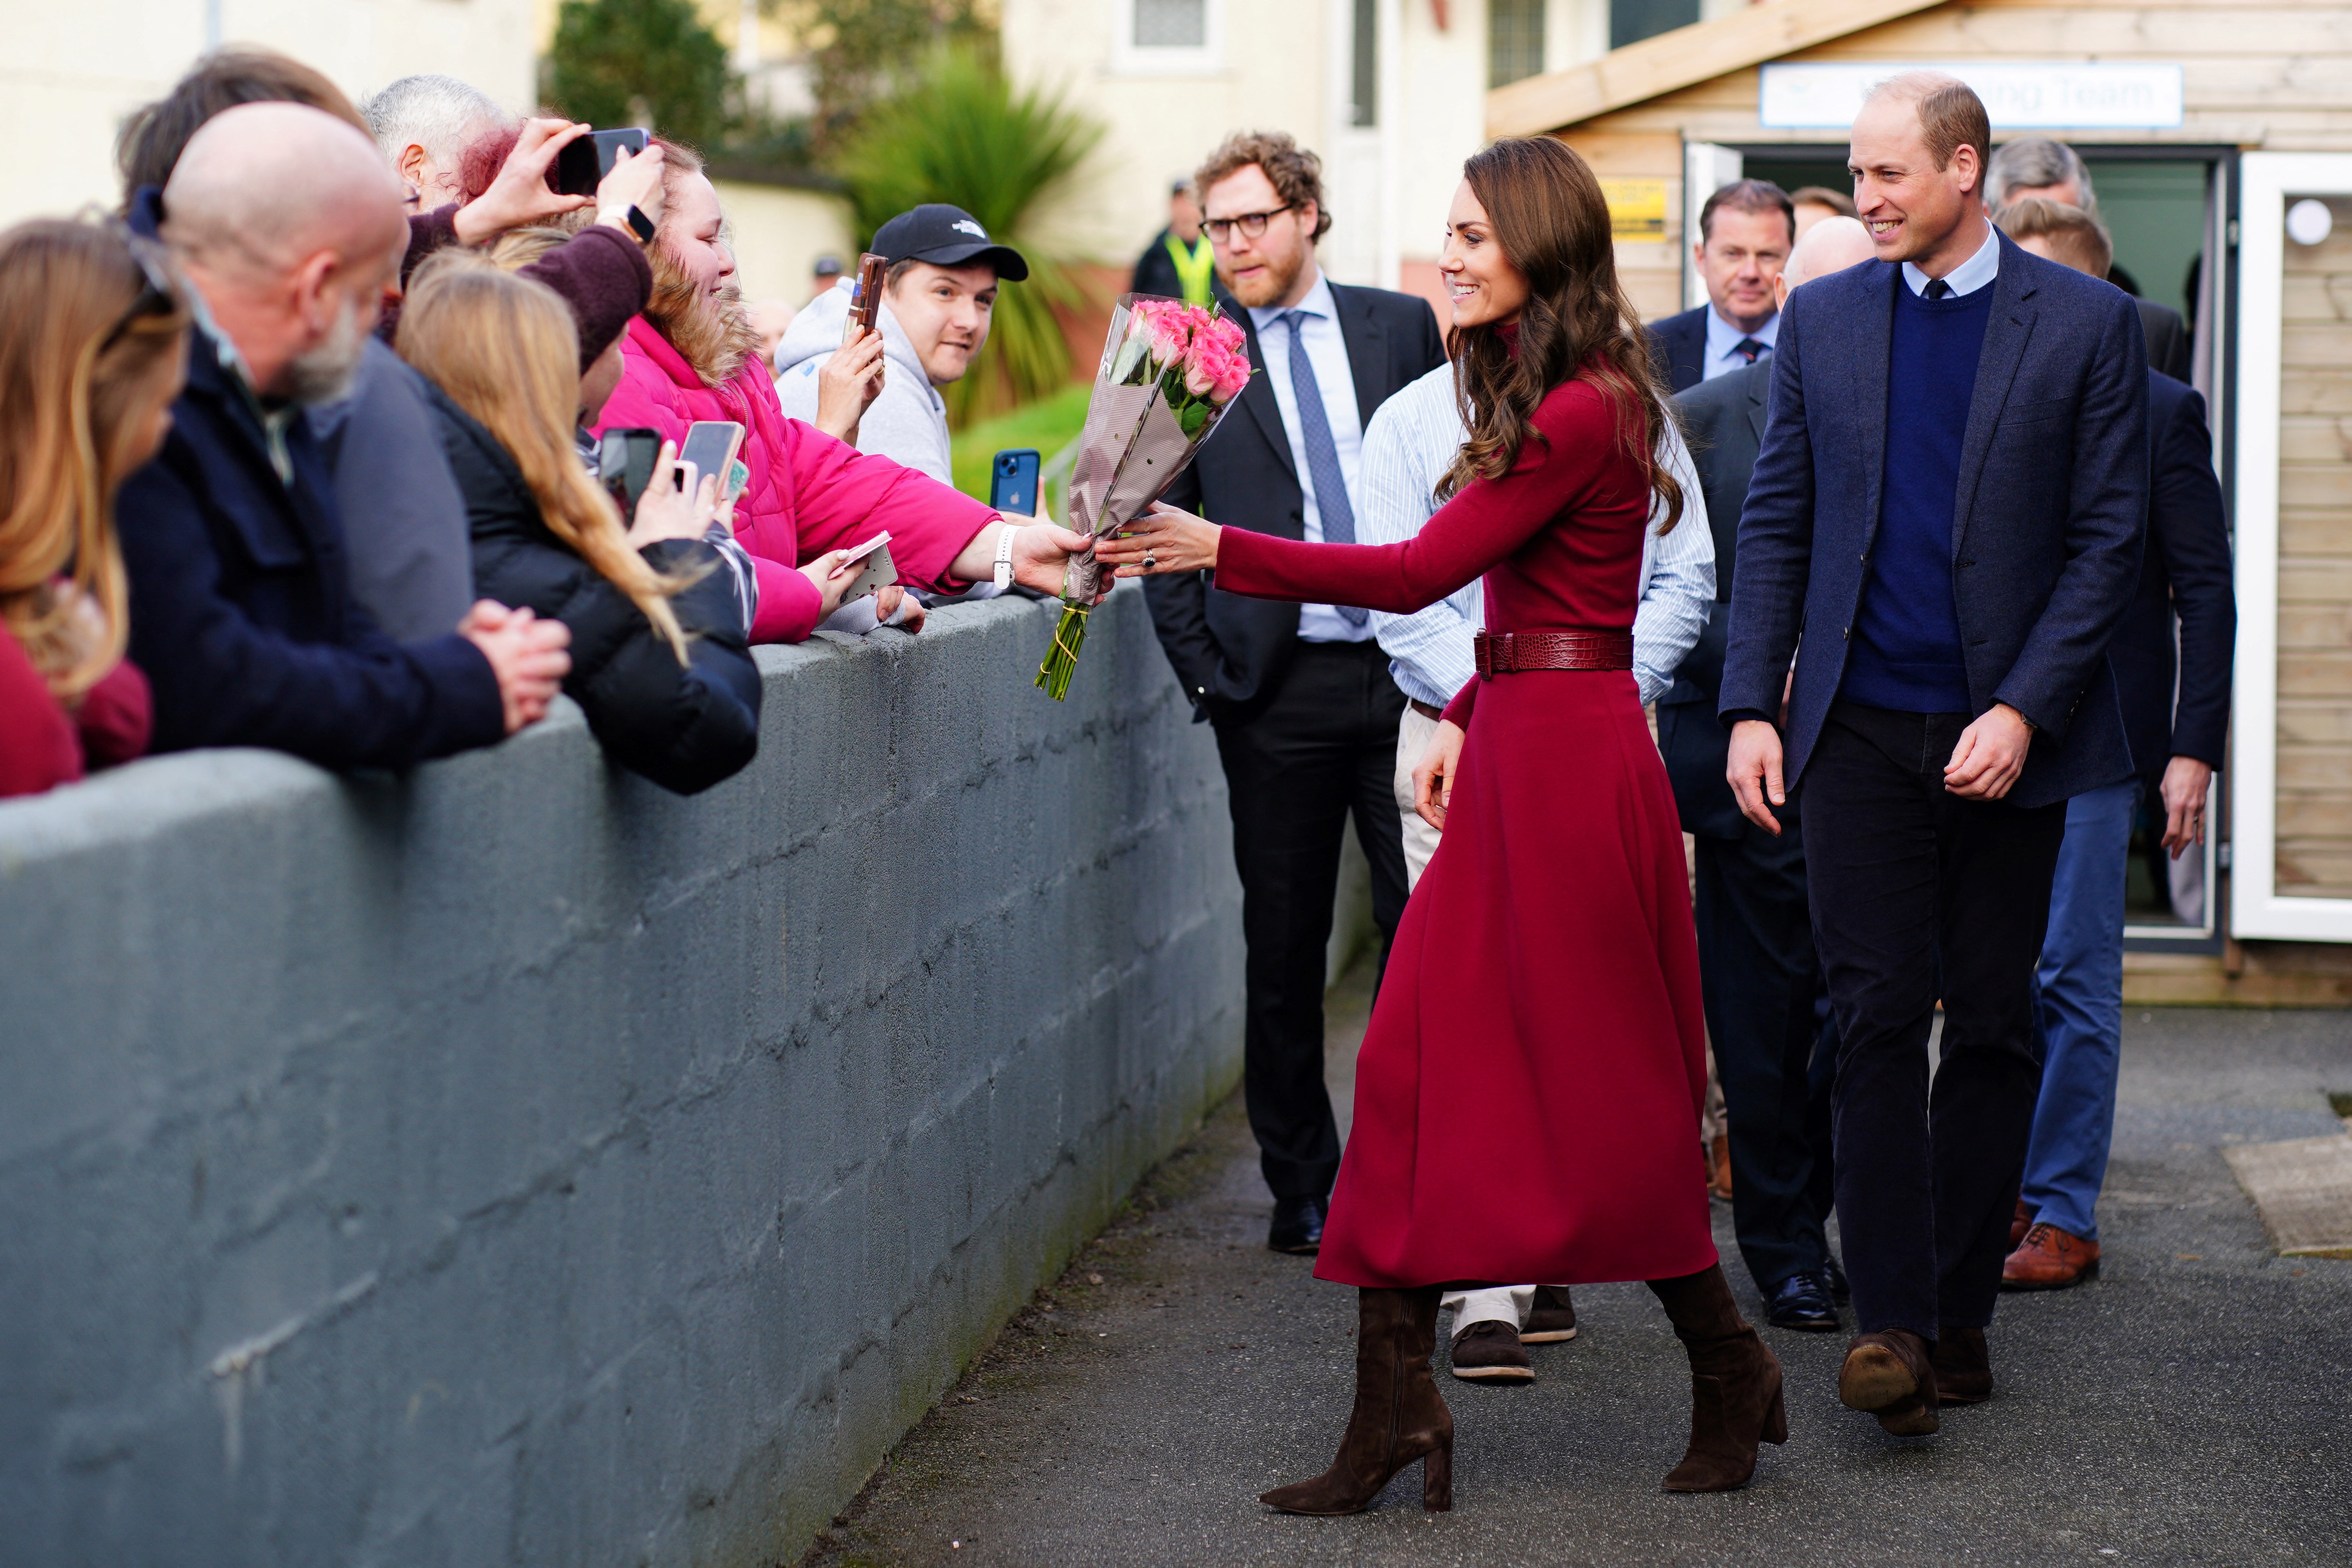 Princess Catherine receiving flowers from fans during her visit to the Dracaena Centre with Prince William in Cornwall, England on February 9, 2023 | Source: Getty Images